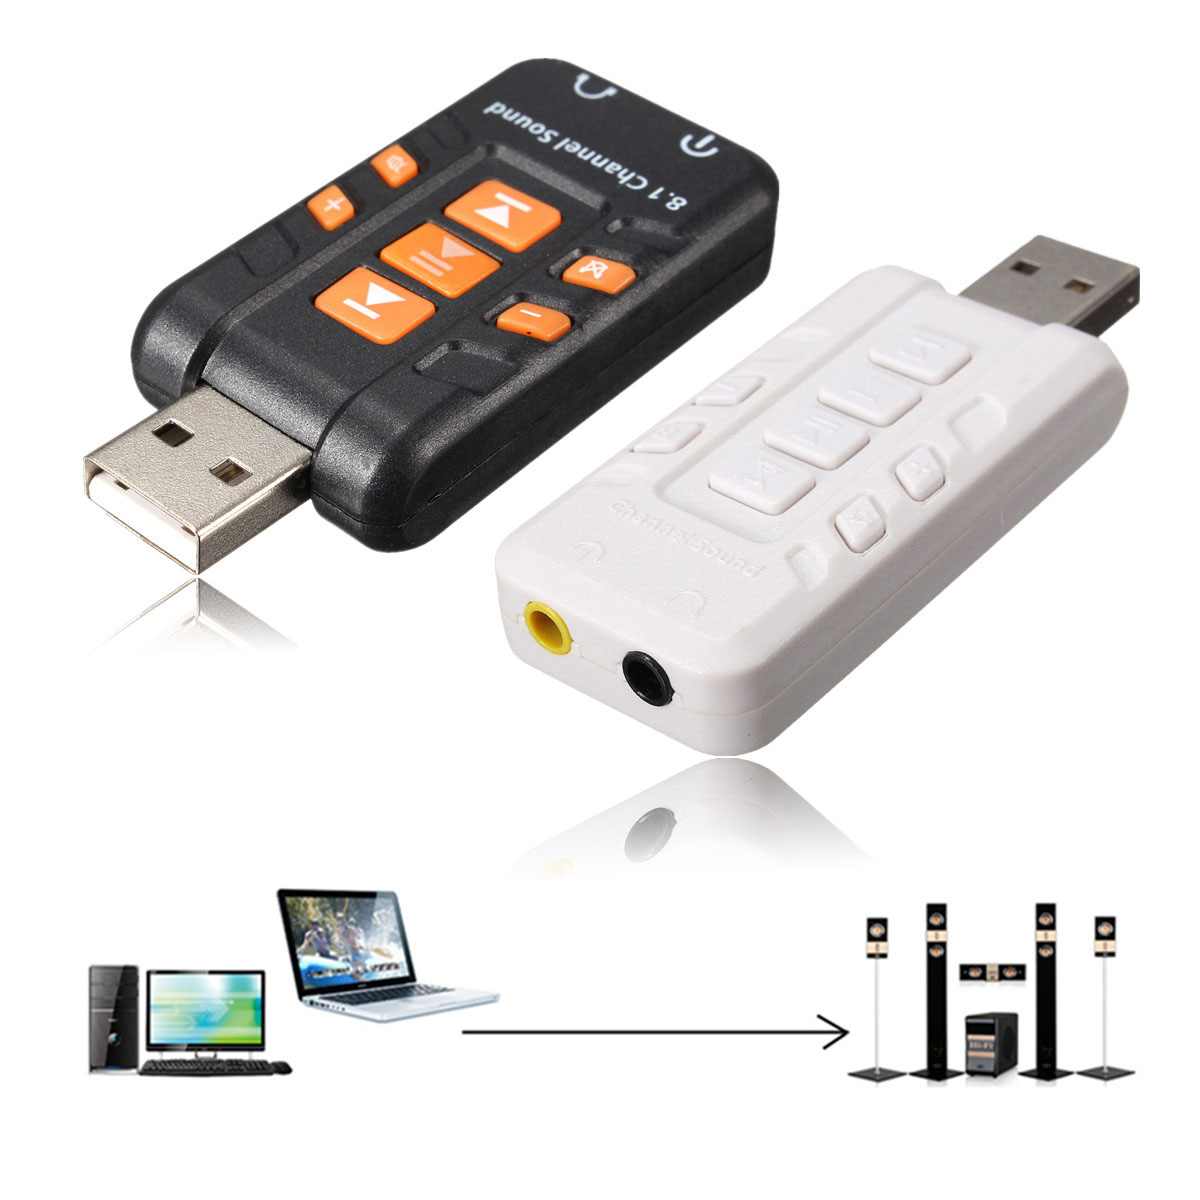 USB-External-81-Channel-3D-Virtual-Audio-Sound-Card-Adapter-Amplifier-For-PC-993434